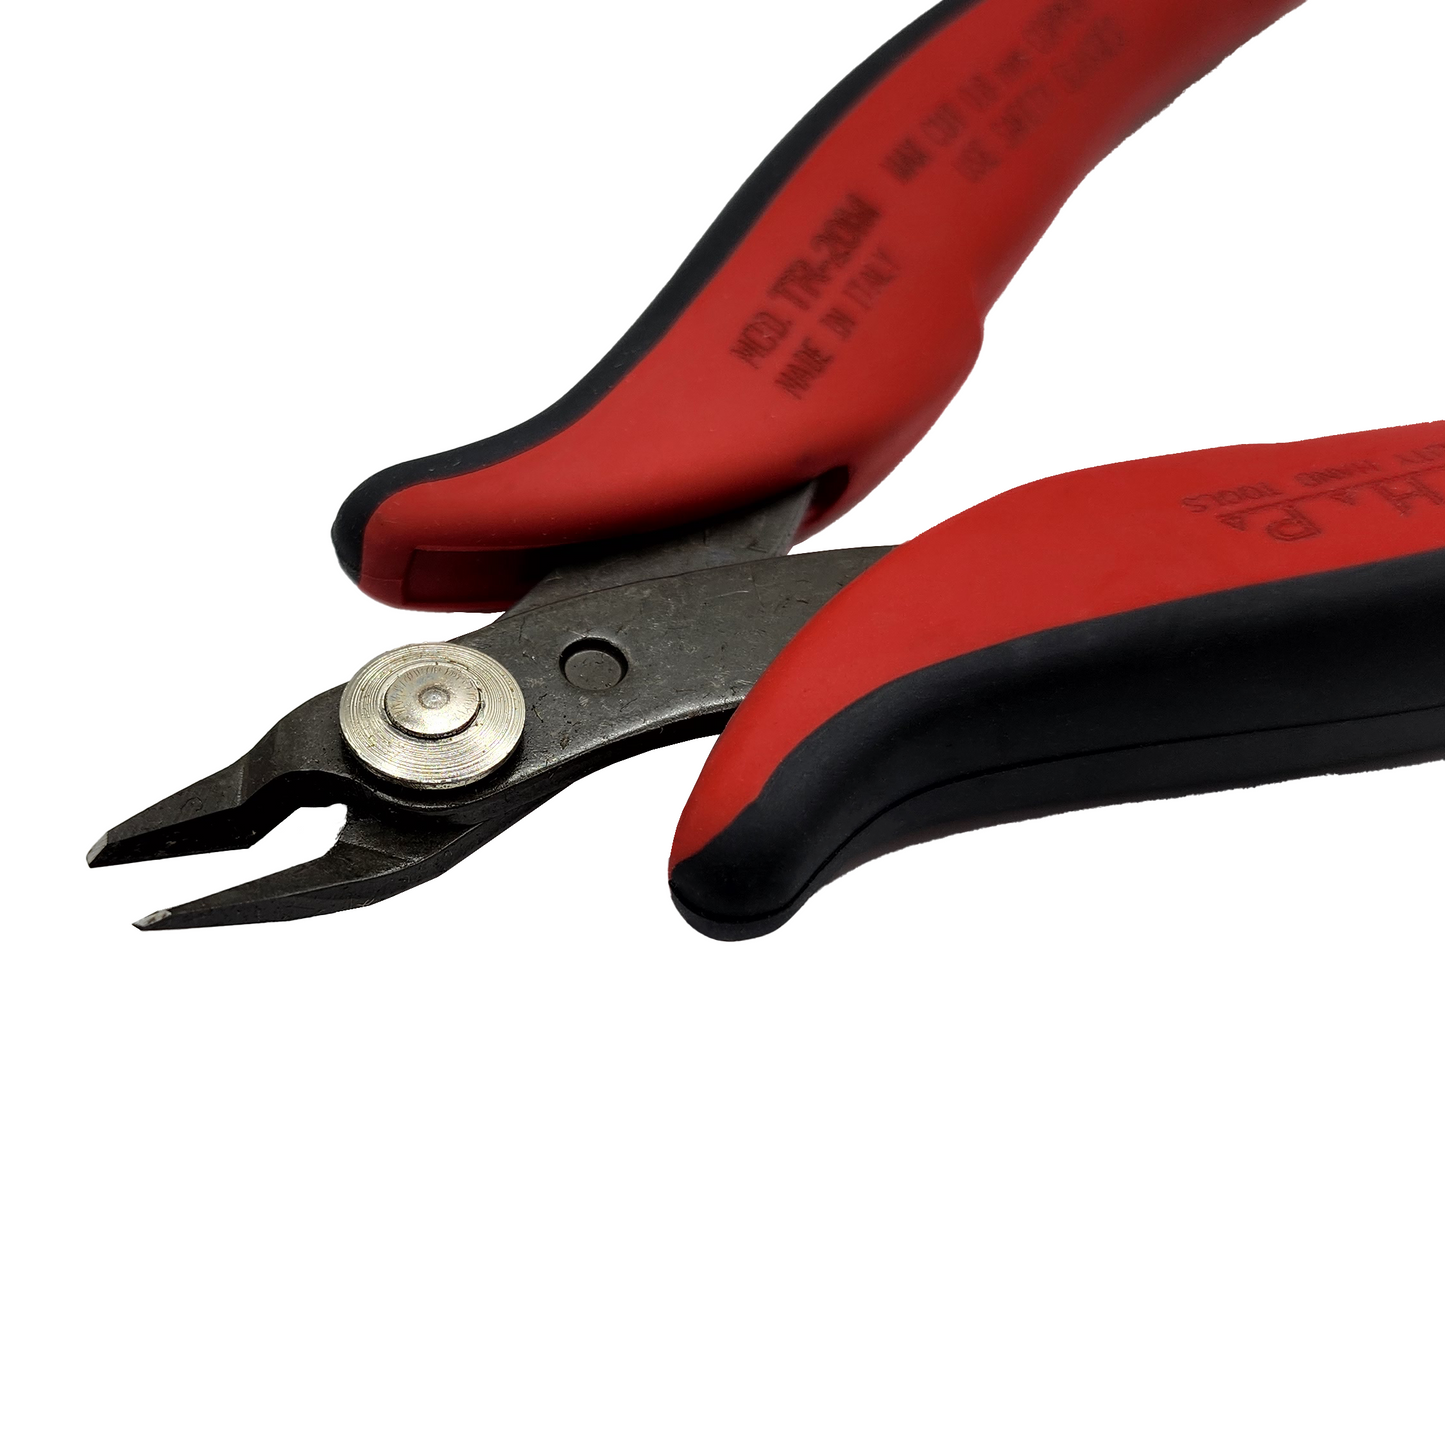 CHP_ CHP TR-20-M Micro Cutter_ Cutters, Pliers, Multi-Tools_ Hakko Products